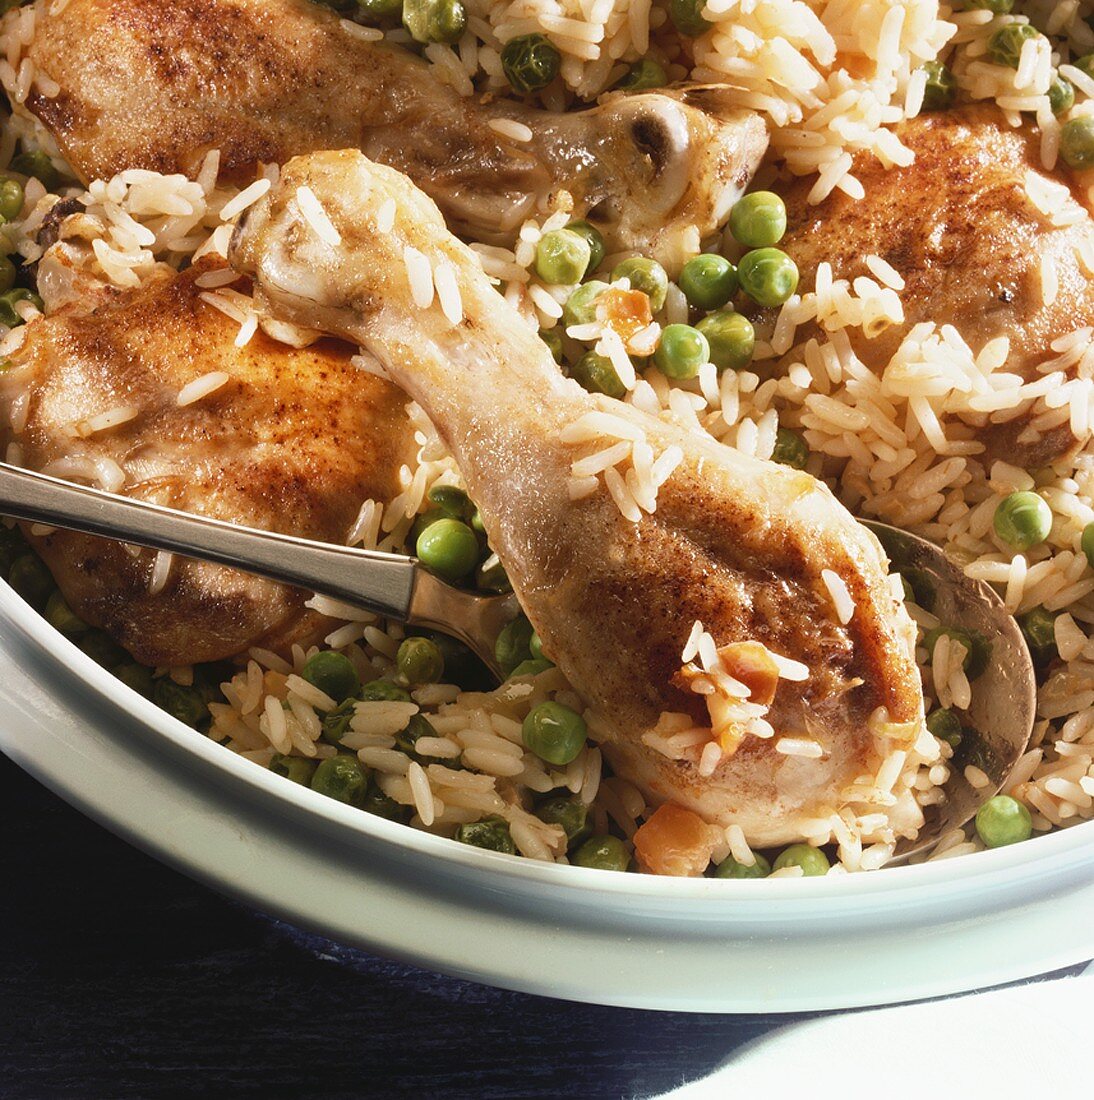 Pan-cooked chicken with rice and peas